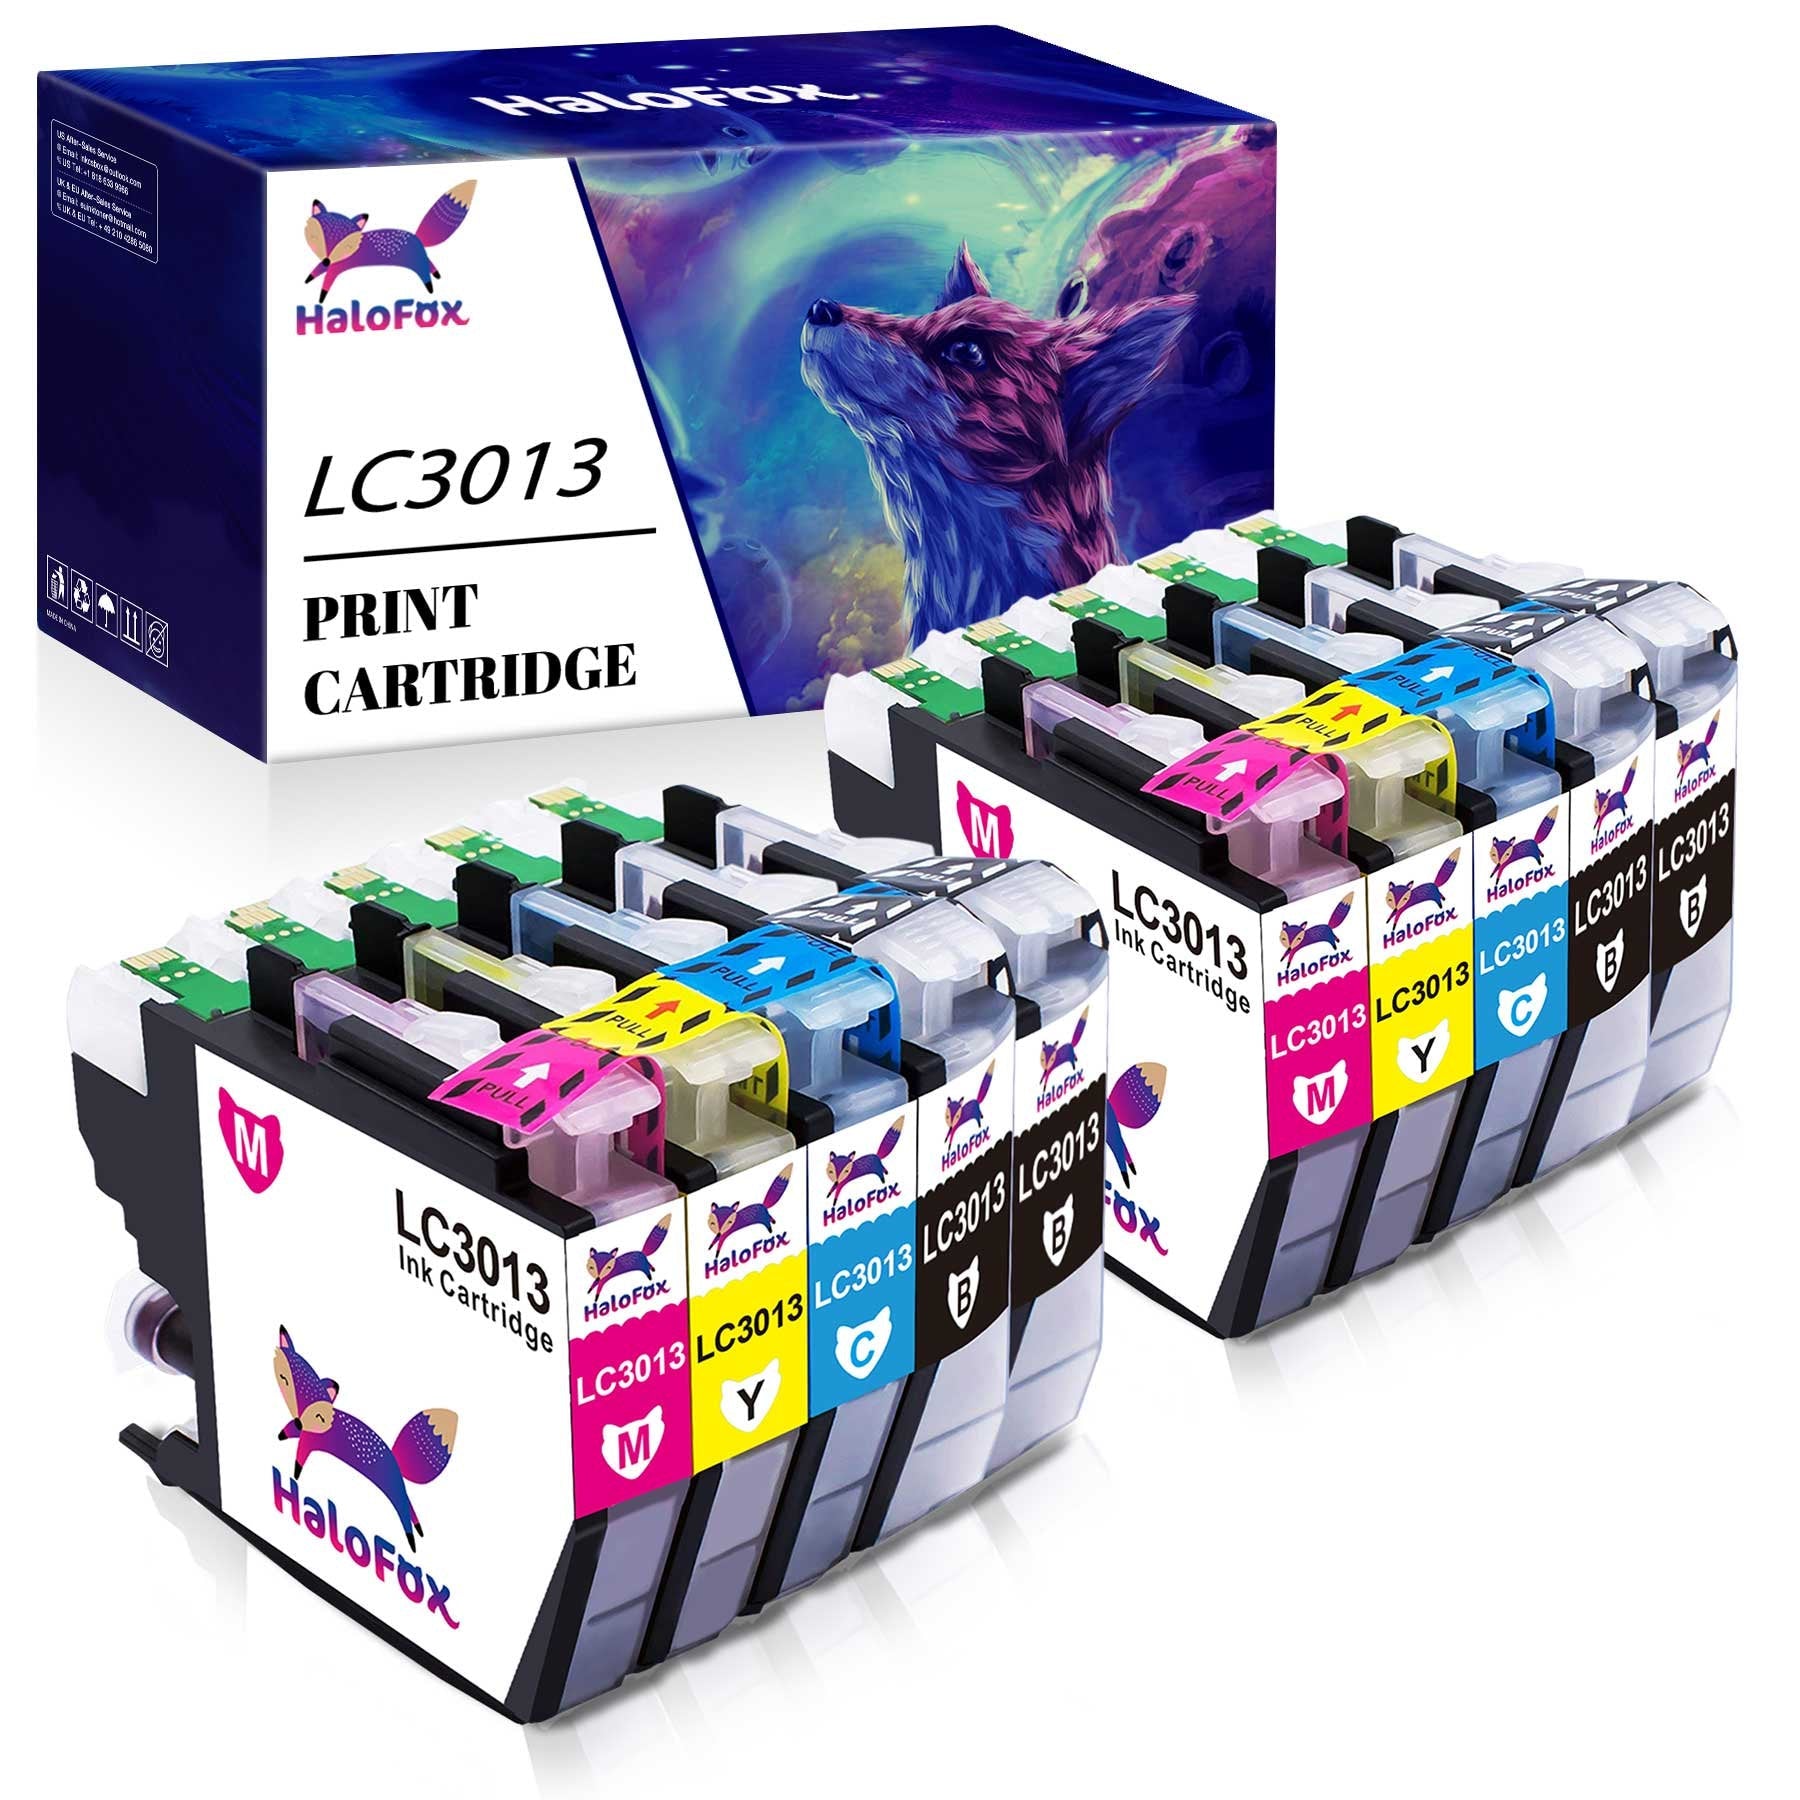 Halofox Ink Cartridge Replacement for Brother LC3011 LC3013 3011 3013 (4 Black, 2 Cyan, 2 Magenta, 2 Yellow)